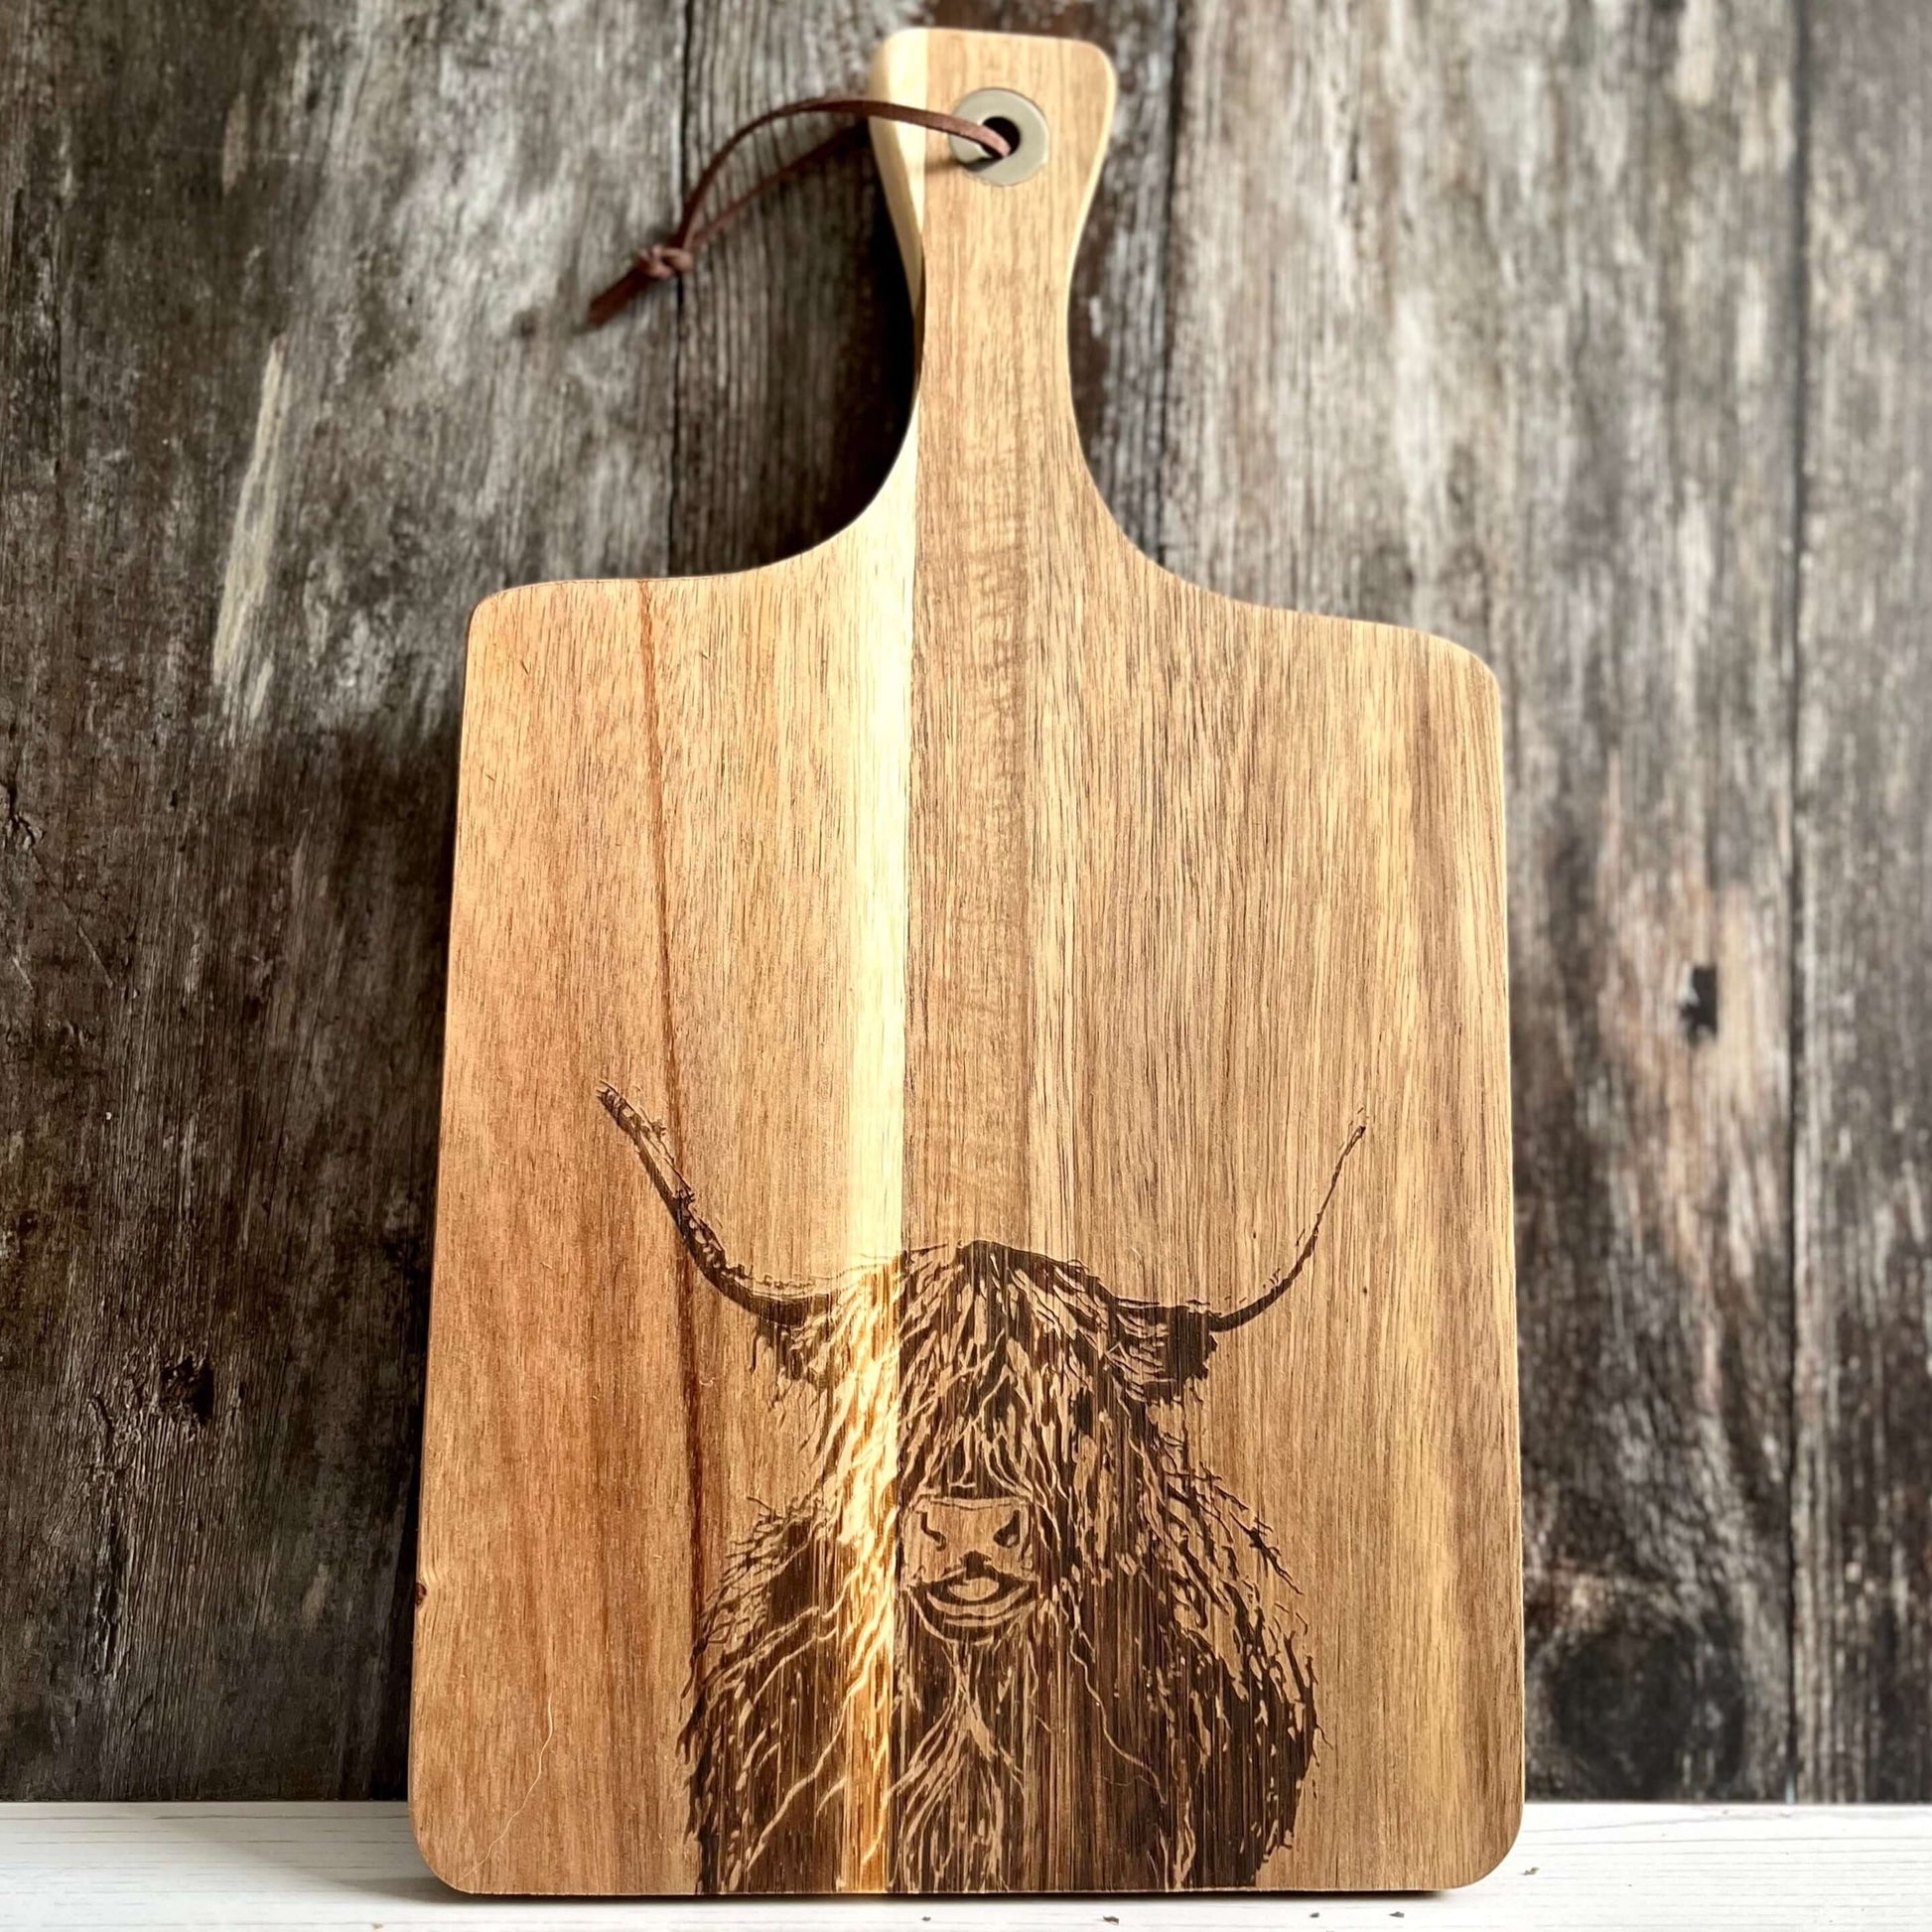 Highland Cow Cutting Board Close Up From Bottom